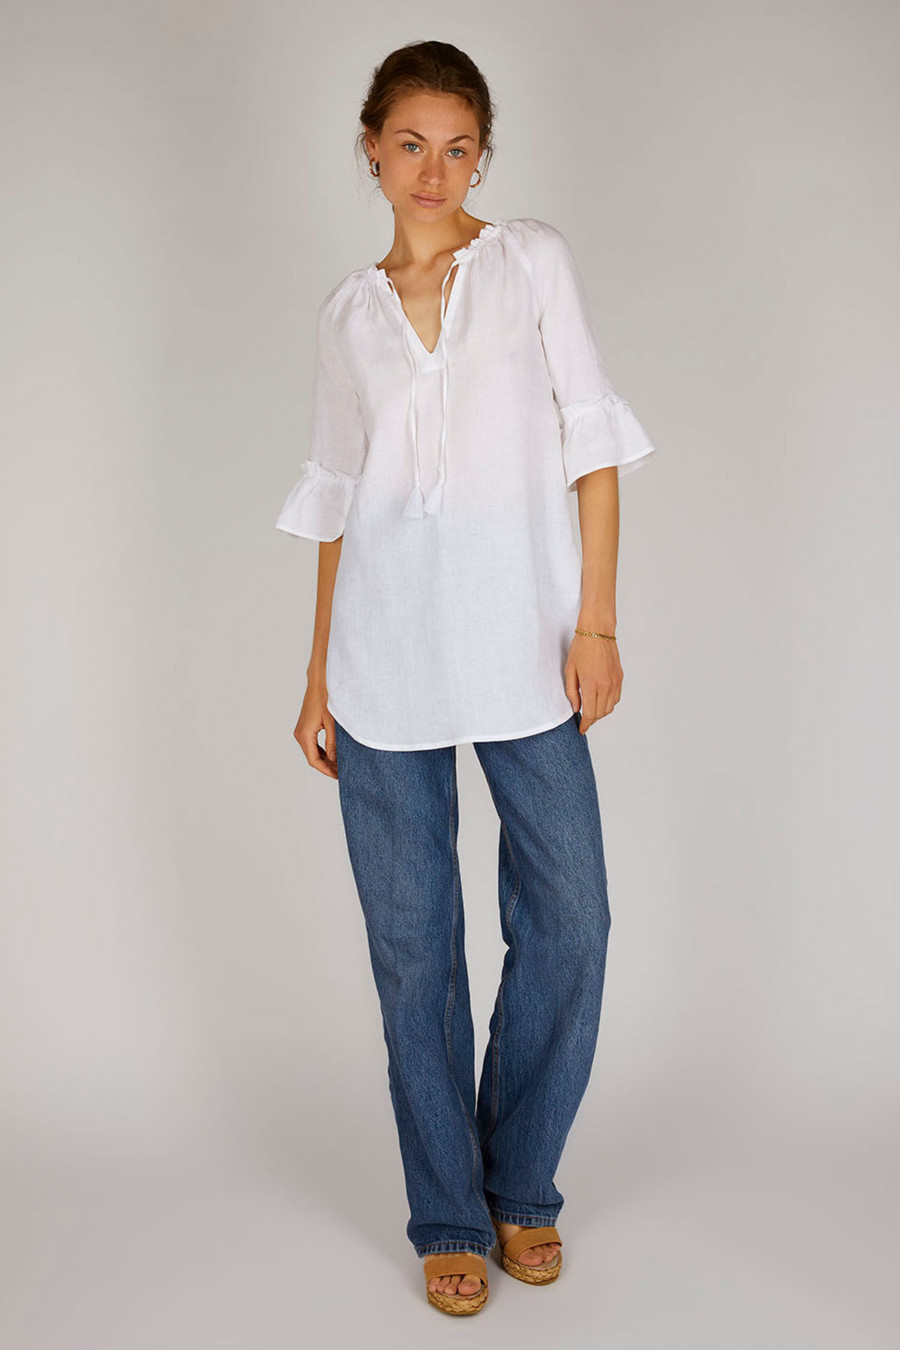 DANYA - Casual linen blouse in tunic form - Colour: White